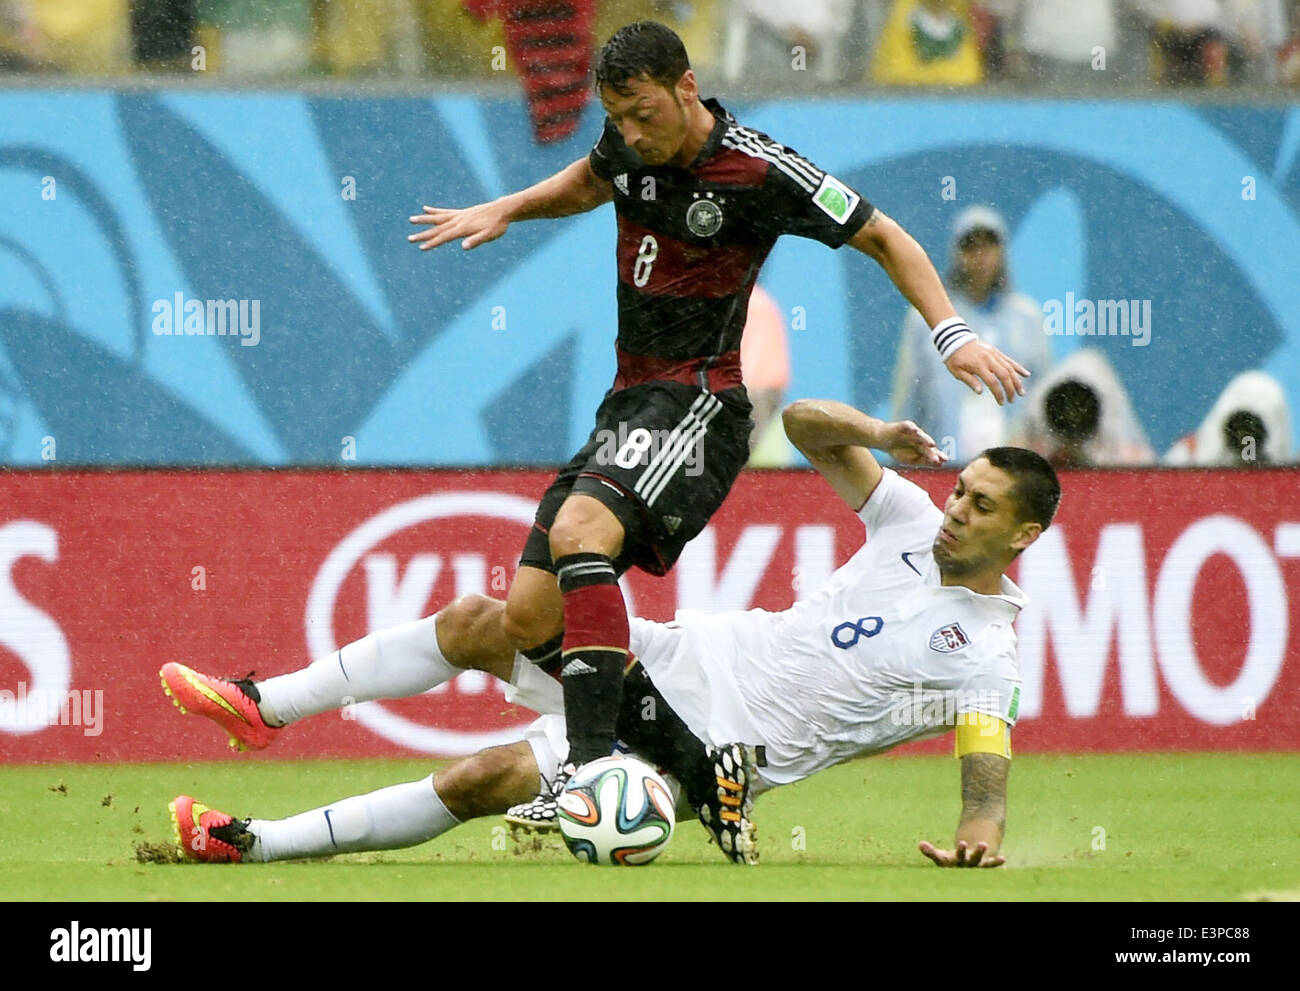 Recife, Brazil. 26th June, 2014. Clint Dempsey of the U.S. (R) vies with Germany's Mesut Ozil during a Group G match between the U.S. and Germany of 2014 FIFA World Cup at the Arena Pernambuco Stadium in Recife, Brazil, on June 26, 2014. Credit:  Lui Siu Wai/Xinhua/Alamy Live News Stock Photo